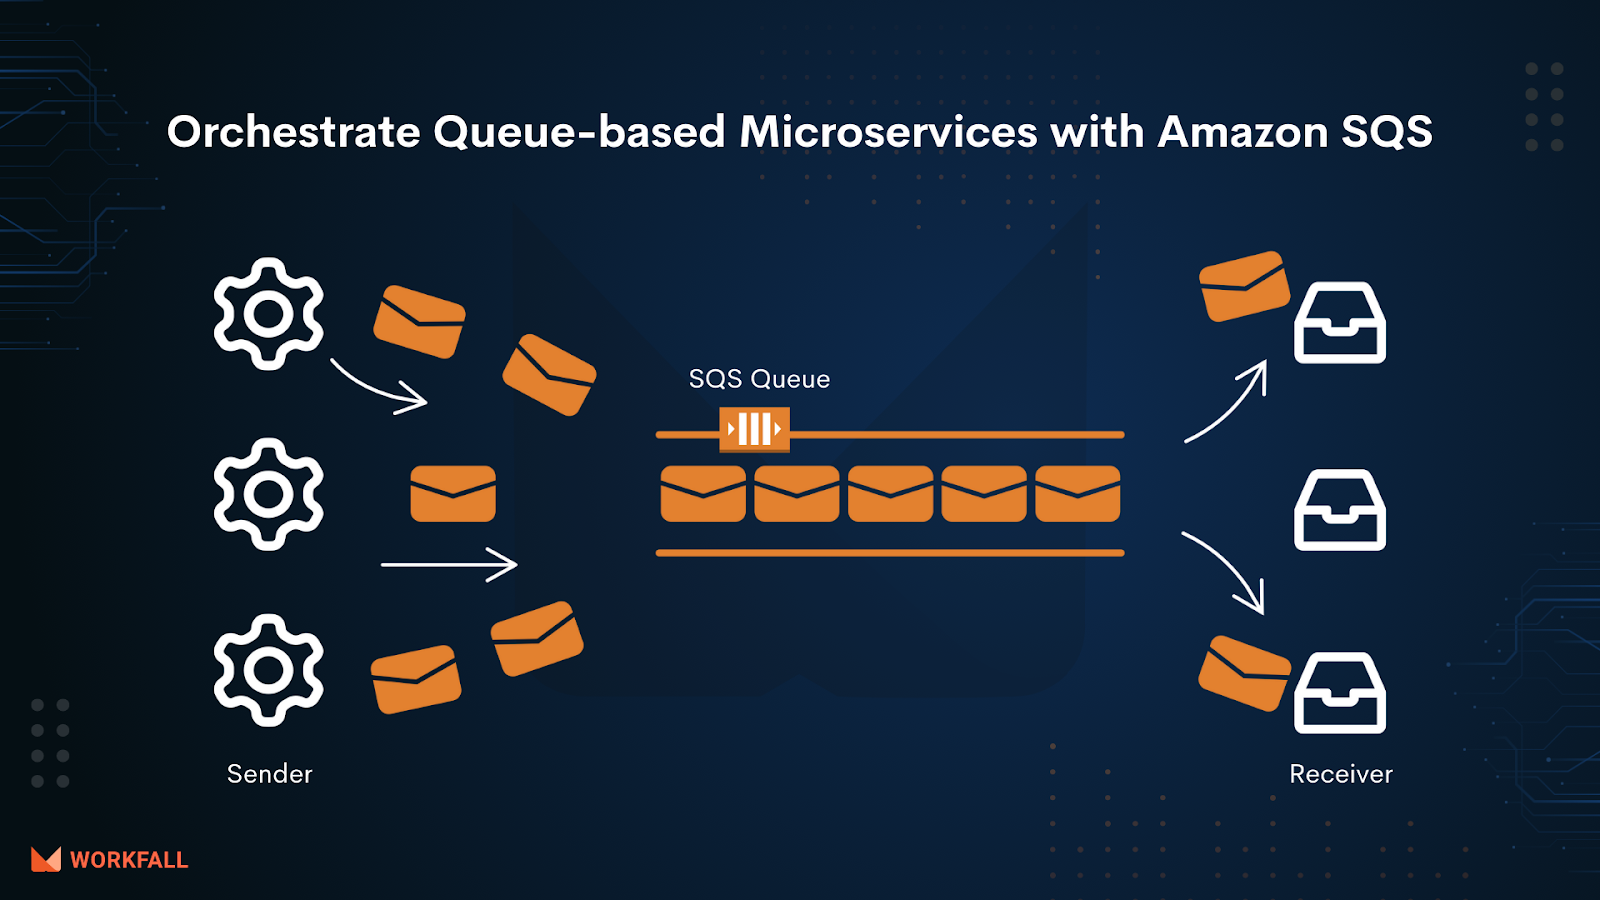 How to orchestrate Queue-based Microservices with AWS Step Functions and Amazon SQS?